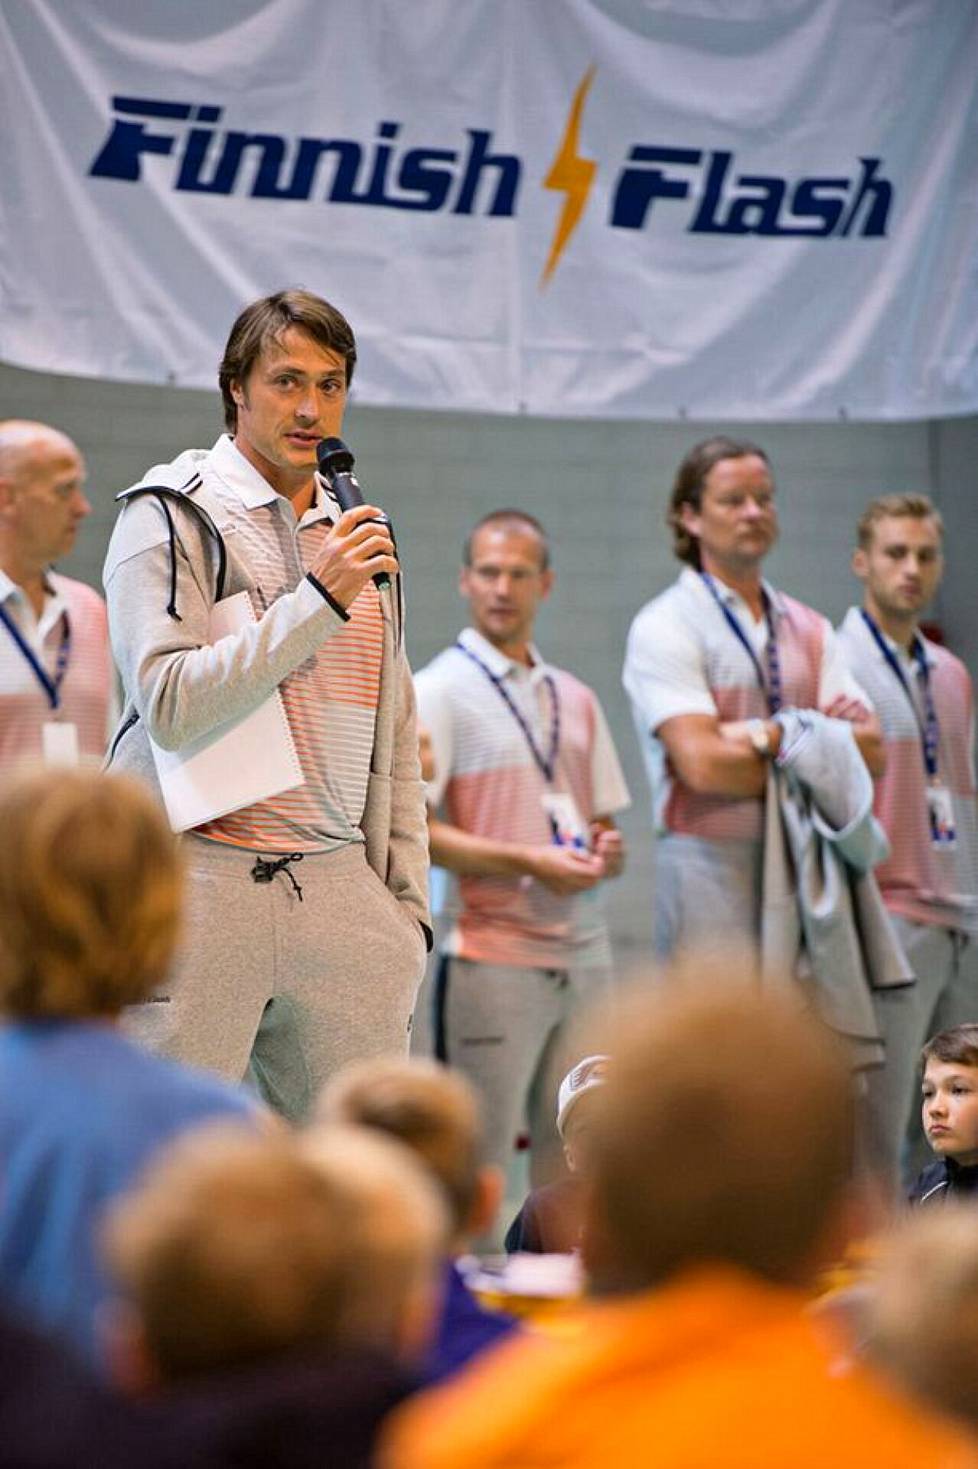 Finnish Flash ry, which is responsible for the camp's arrangements, has, under the leadership of Selänte, channeled charitable support, e.g.  for needy families and mental health work.